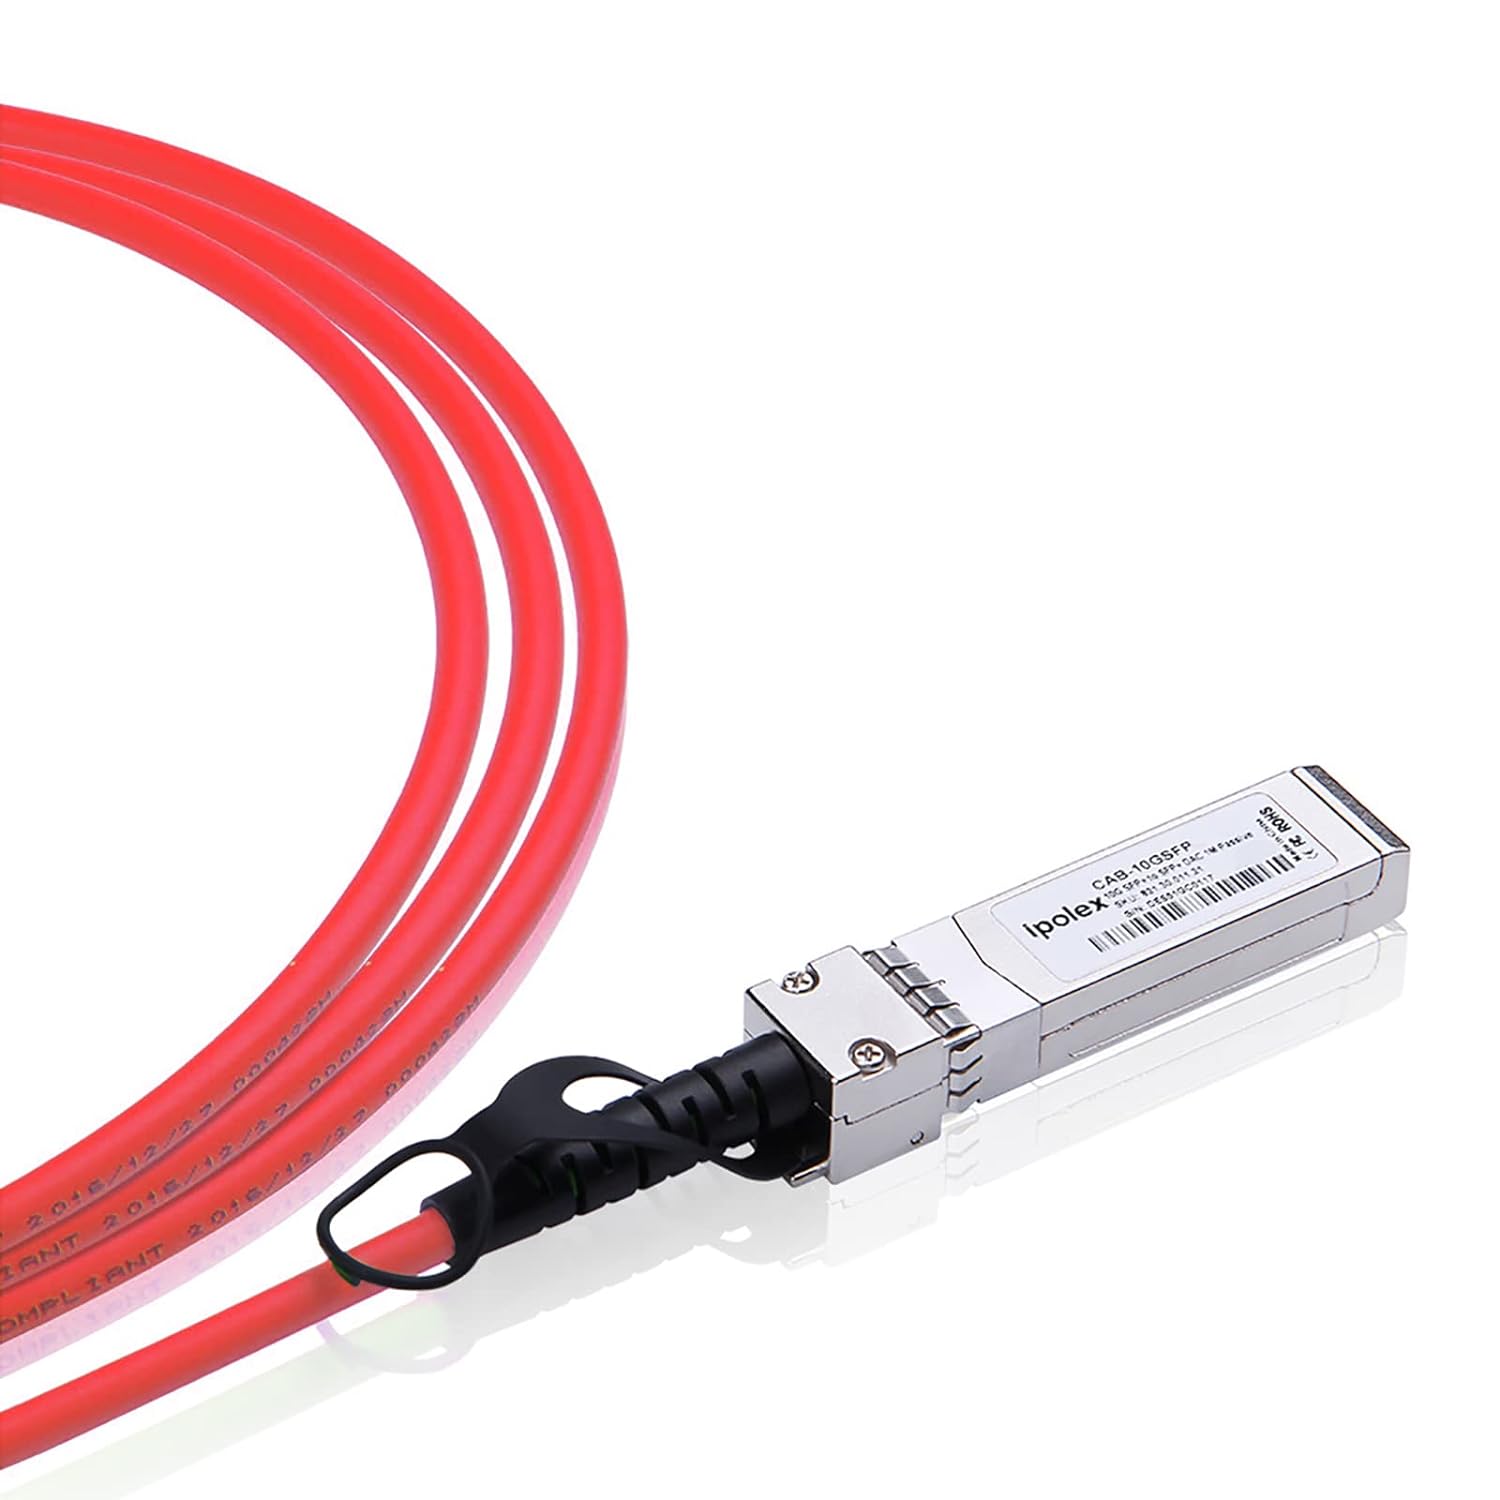 Colored 10G SFP+ Twinax Cable, Direct Attach Copper(DAC) Passive Cable, 0.25m (0.82ft) in Red, for Cisco SFP-H10GB-CU0.25M, Meraki, Ubiquit, Mikrotik, Intel, Fortinet, Netgear, D-Link and More